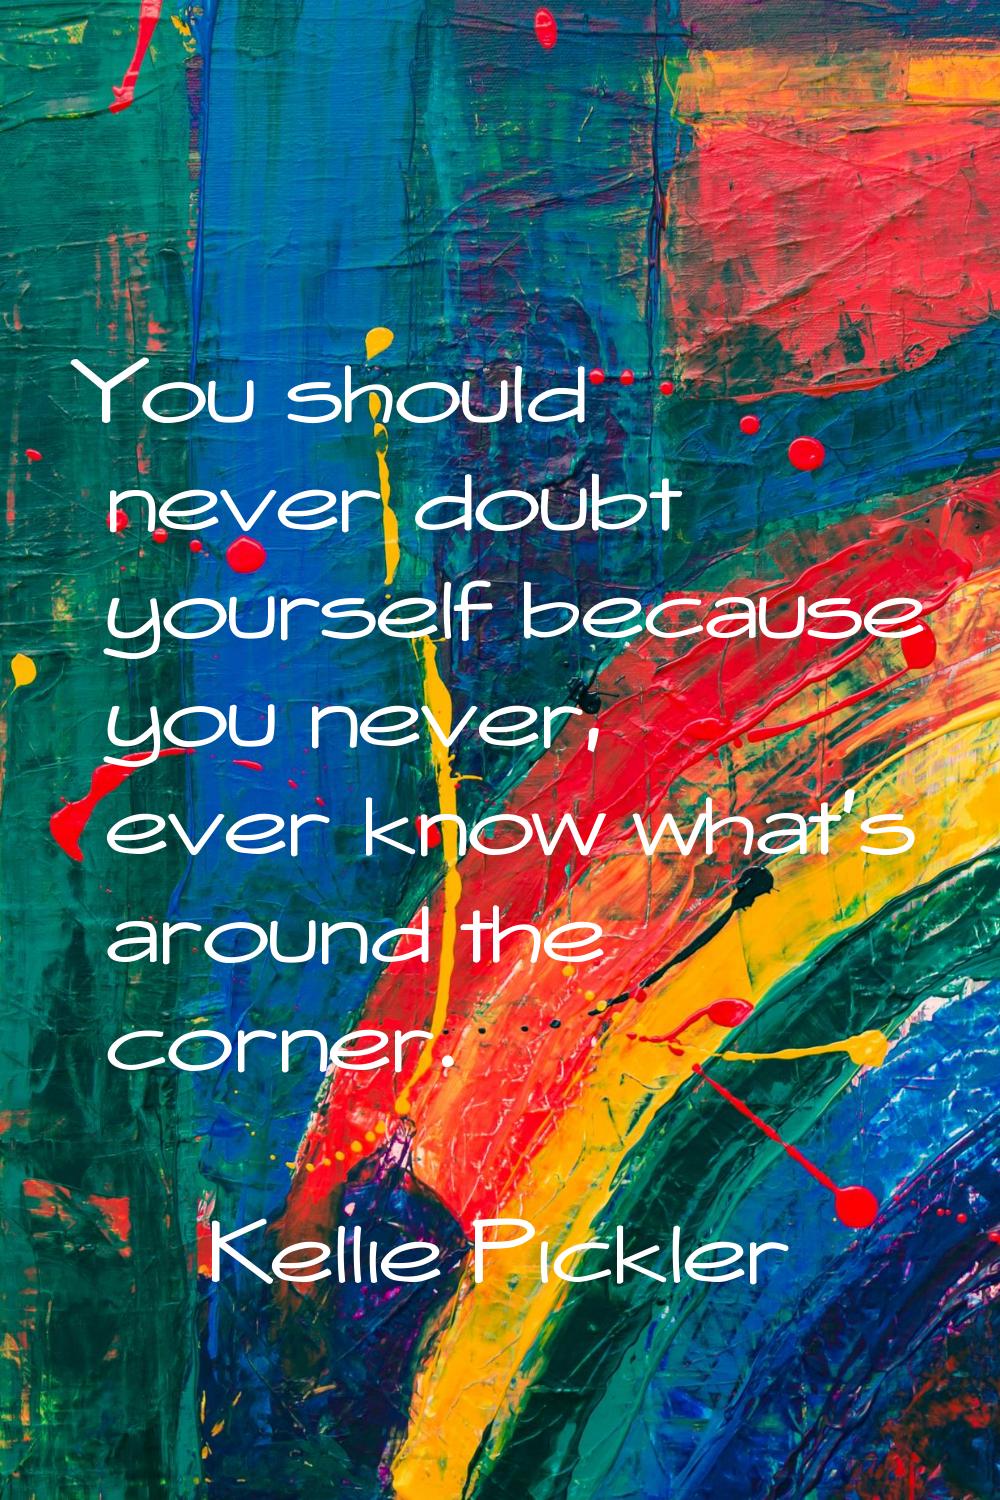 You should never doubt yourself because you never, ever know what's around the corner.